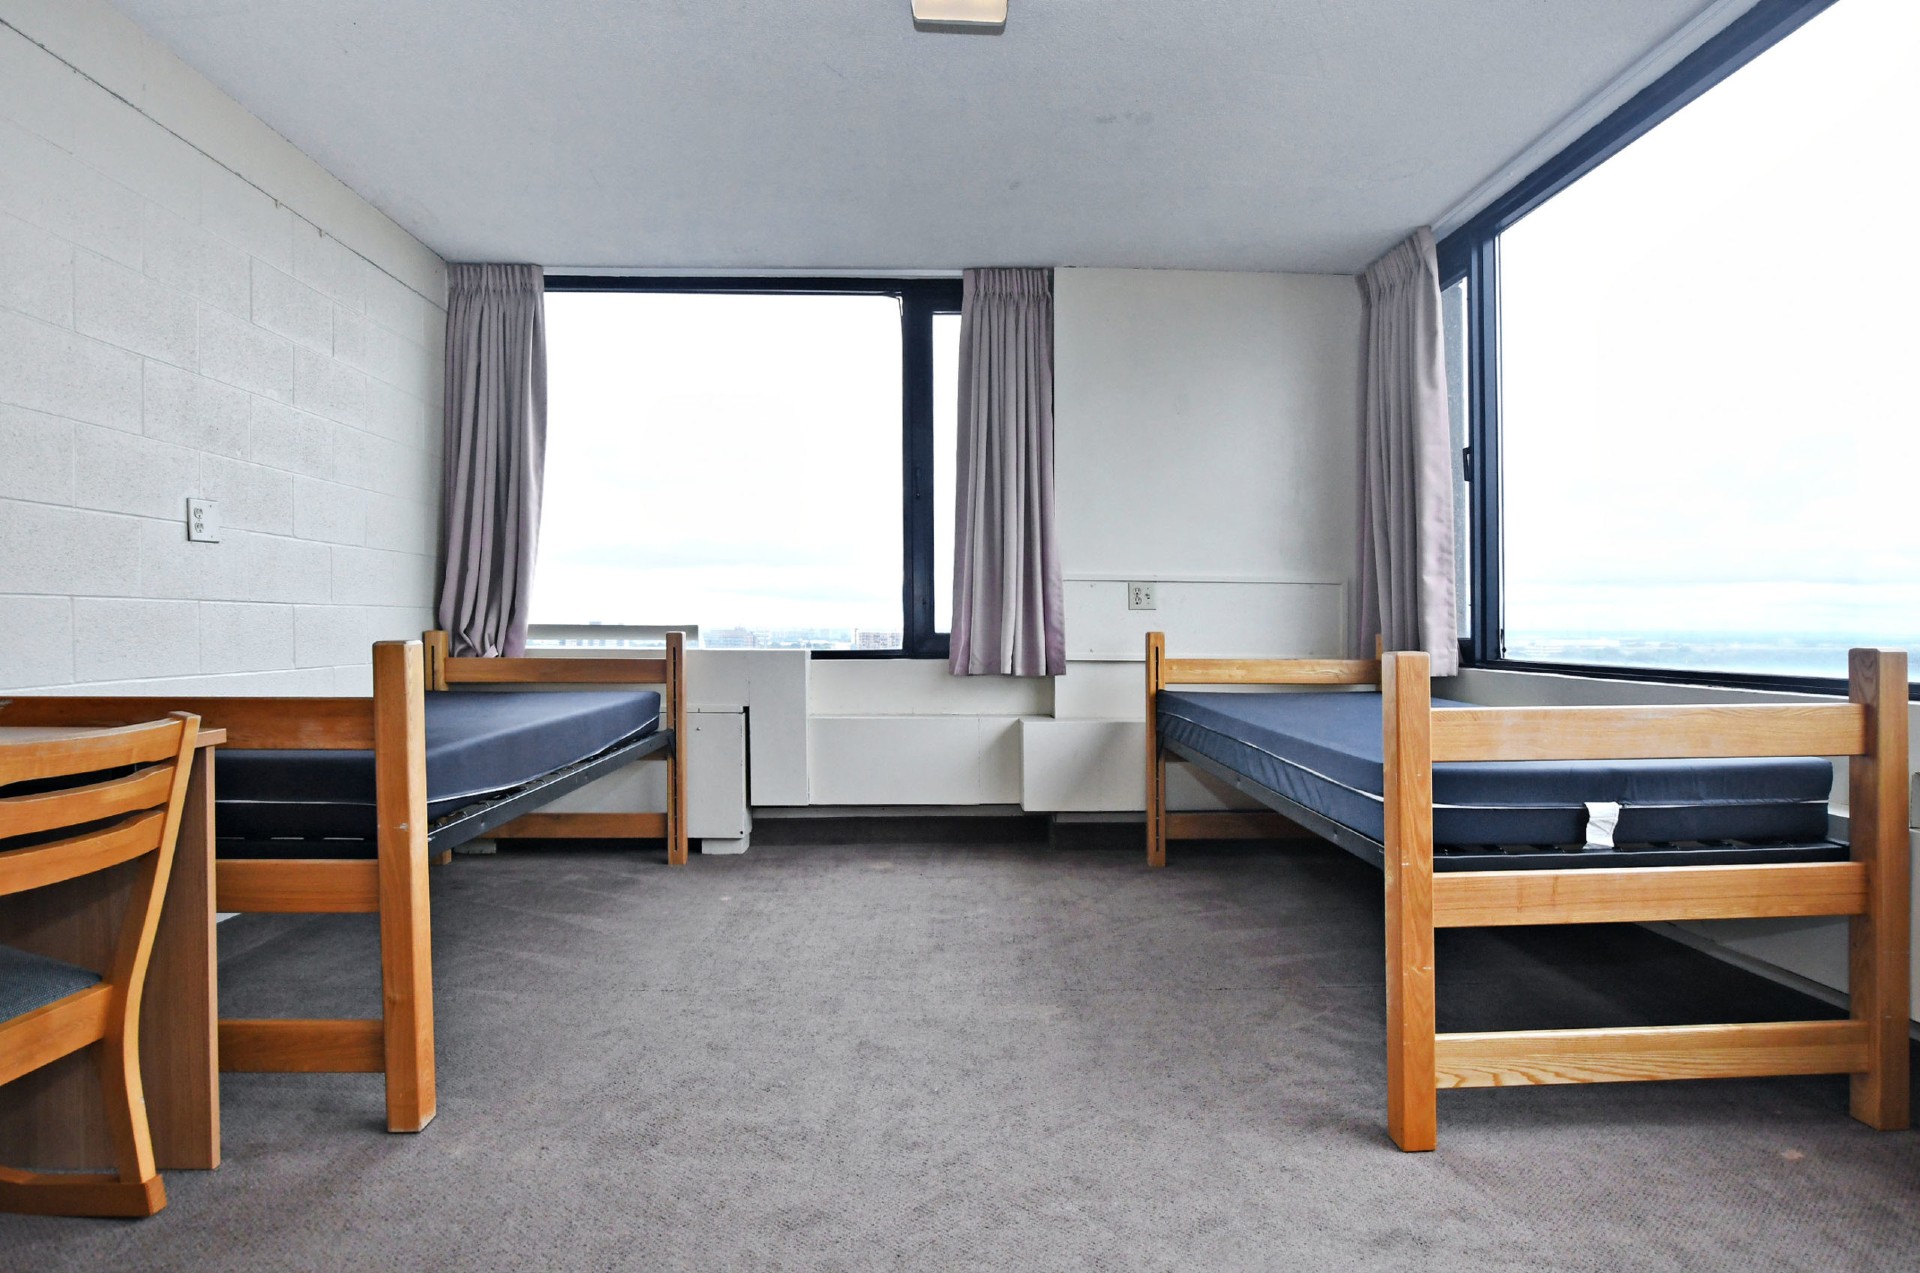 Picture of a double room in Stong building. Two windows, two beds, a desk and a dresser.